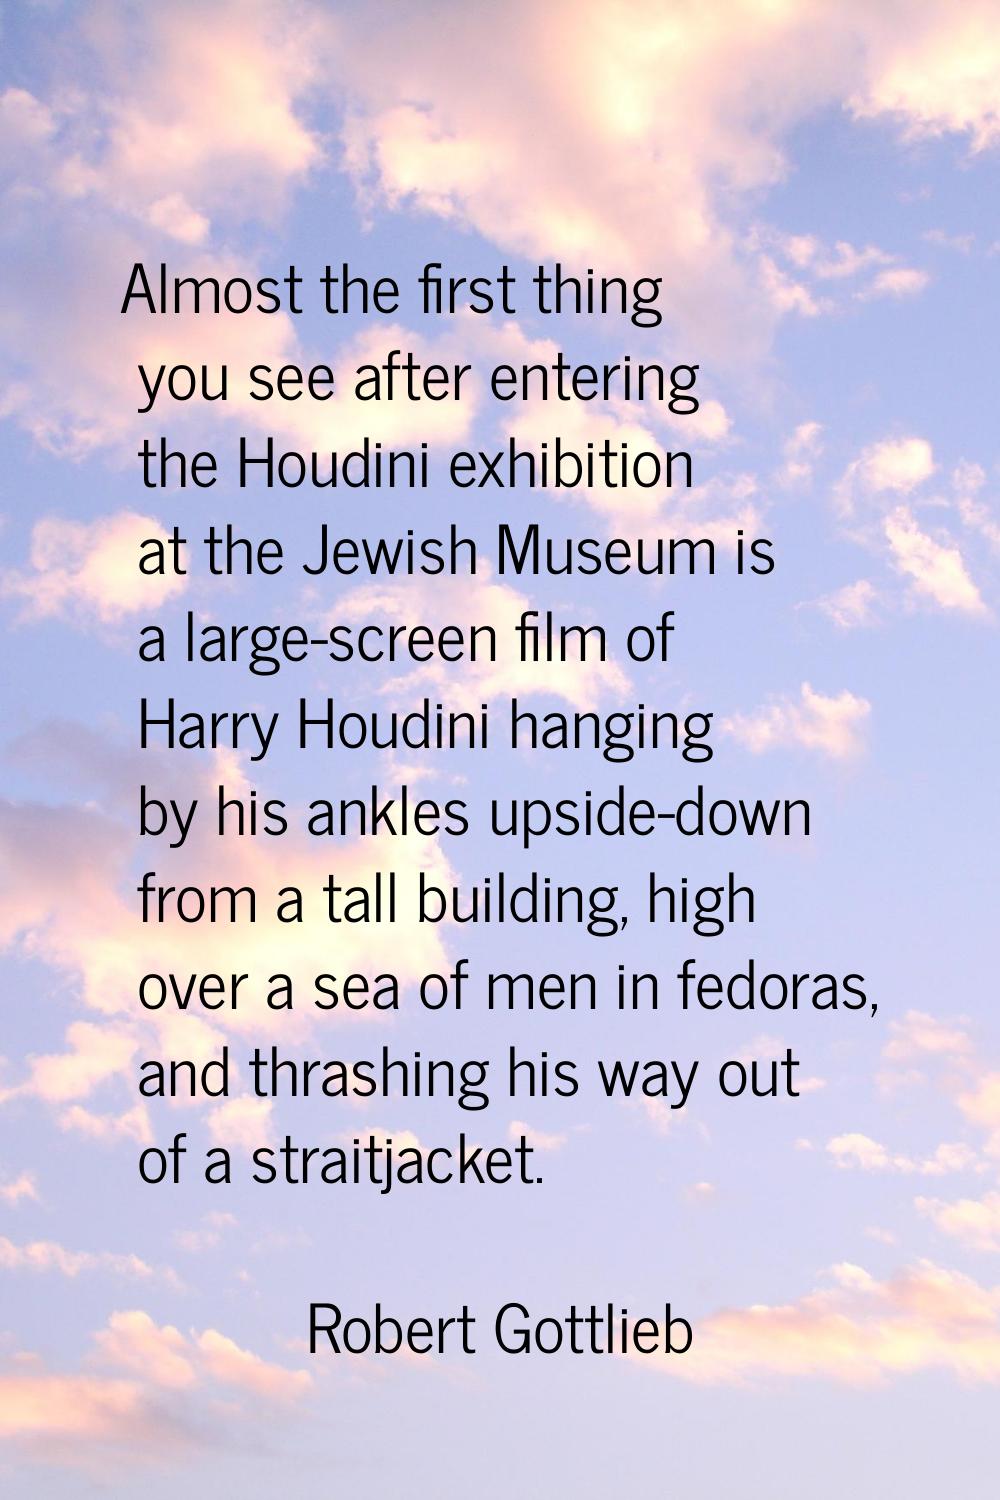 Almost the first thing you see after entering the Houdini exhibition at the Jewish Museum is a larg